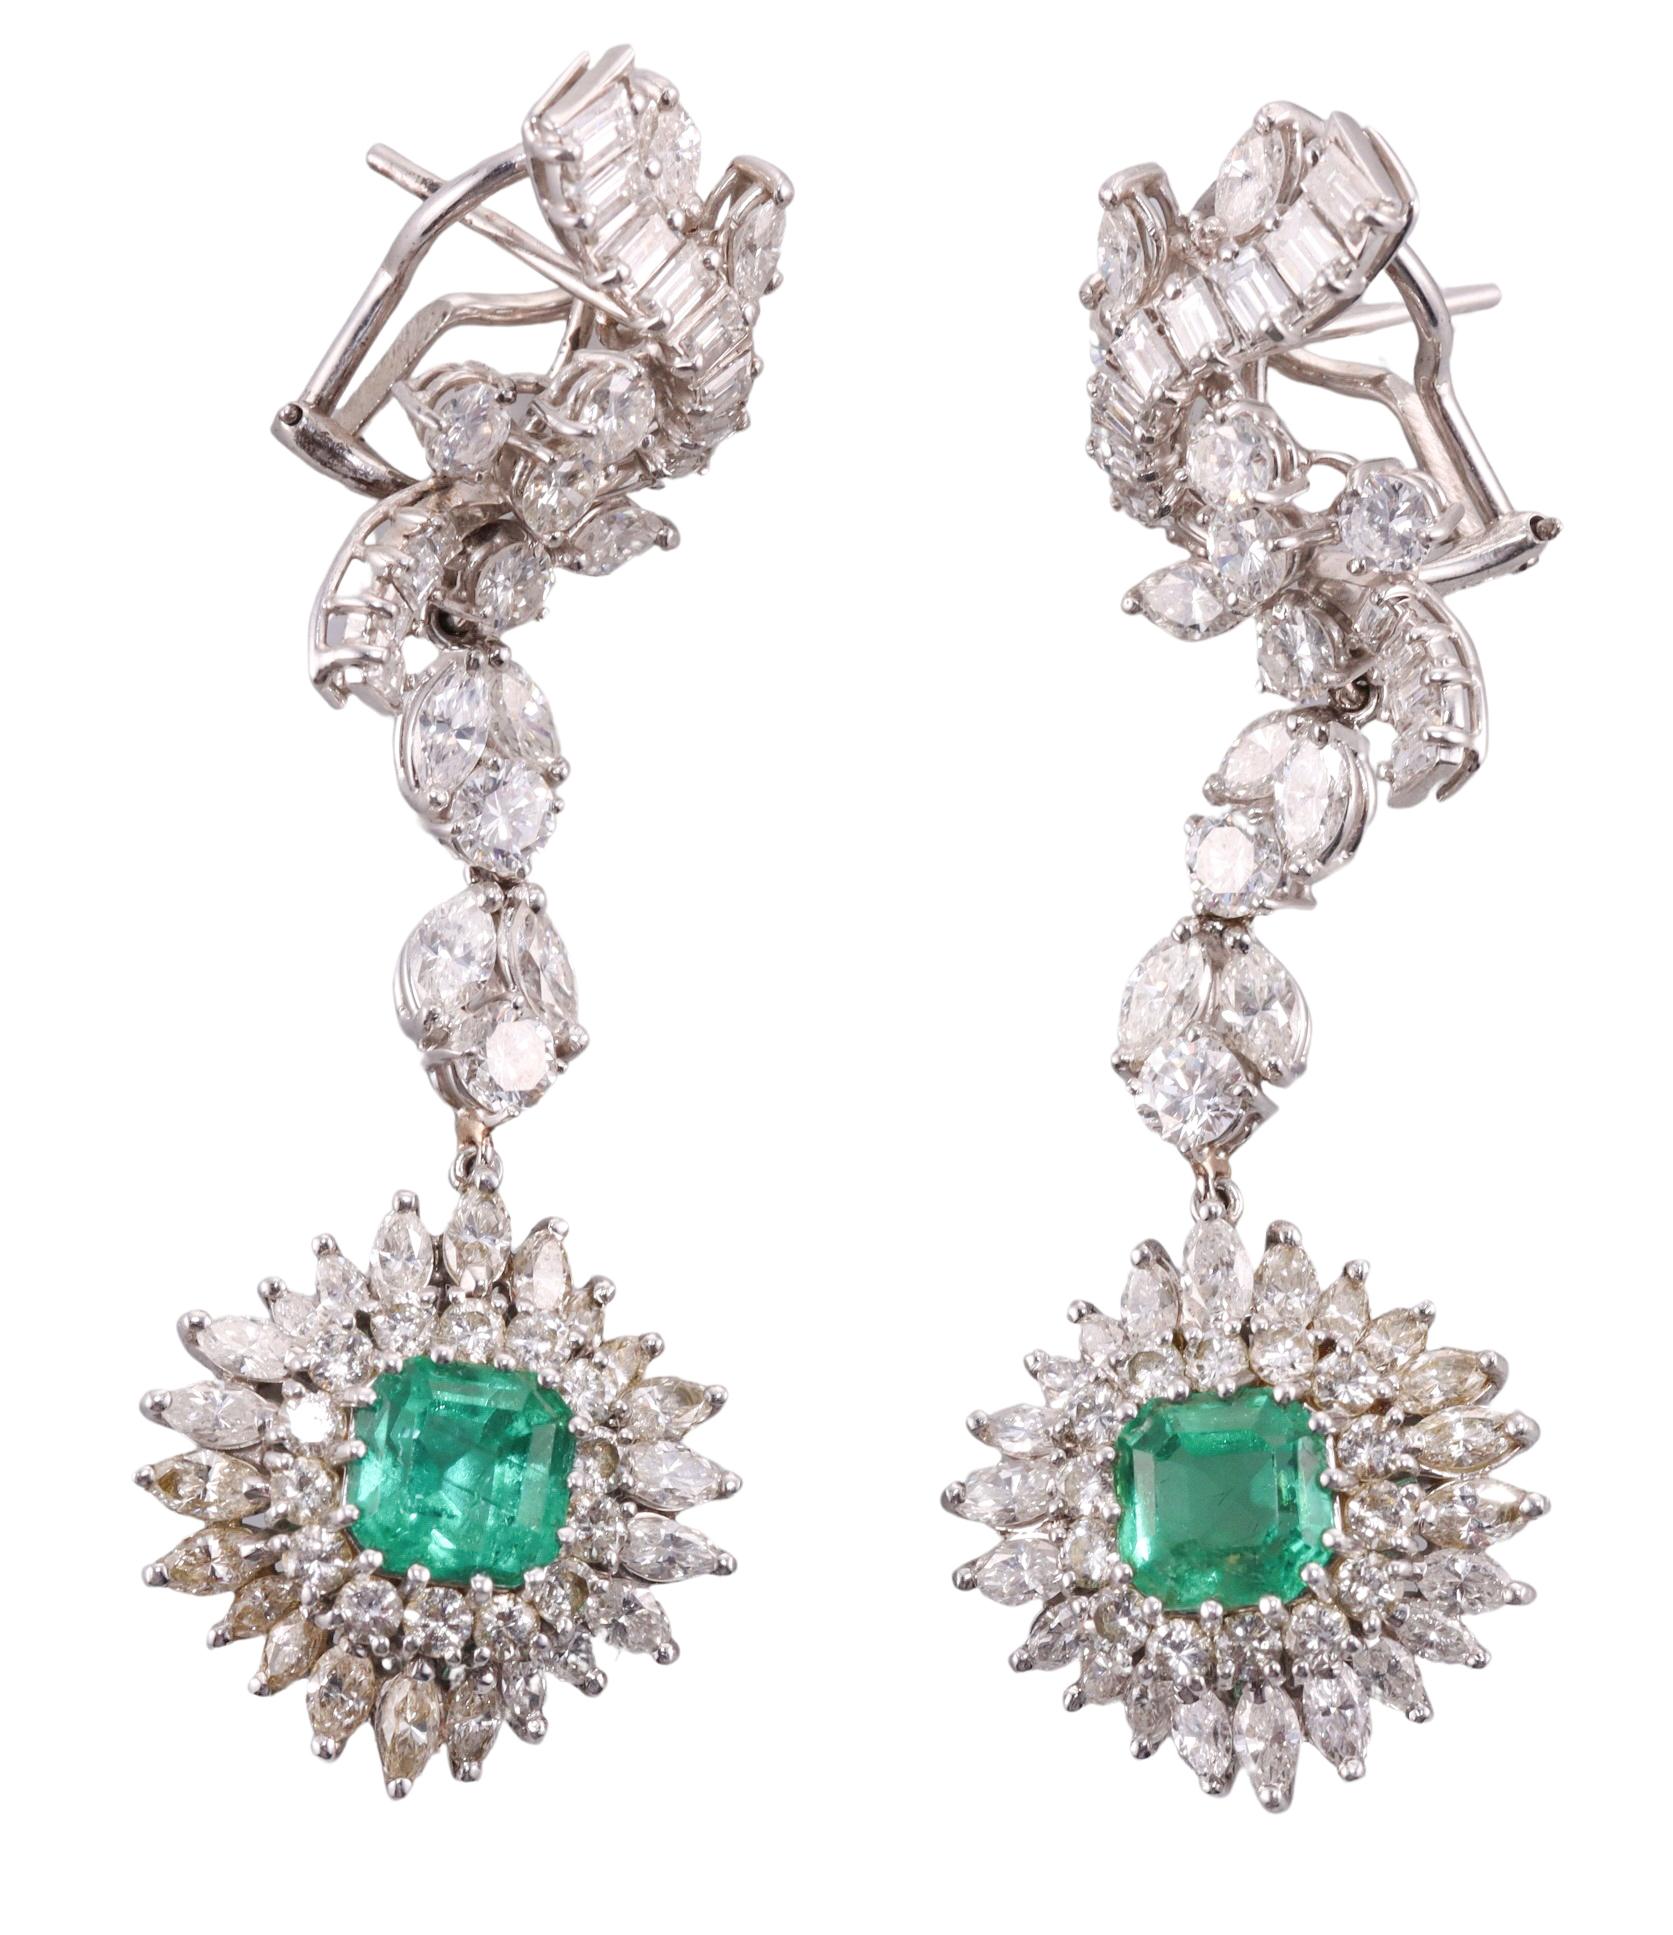 Midcentury Platinum Diamond Emerald Night & Day Earrings In Excellent Condition For Sale In New York, NY